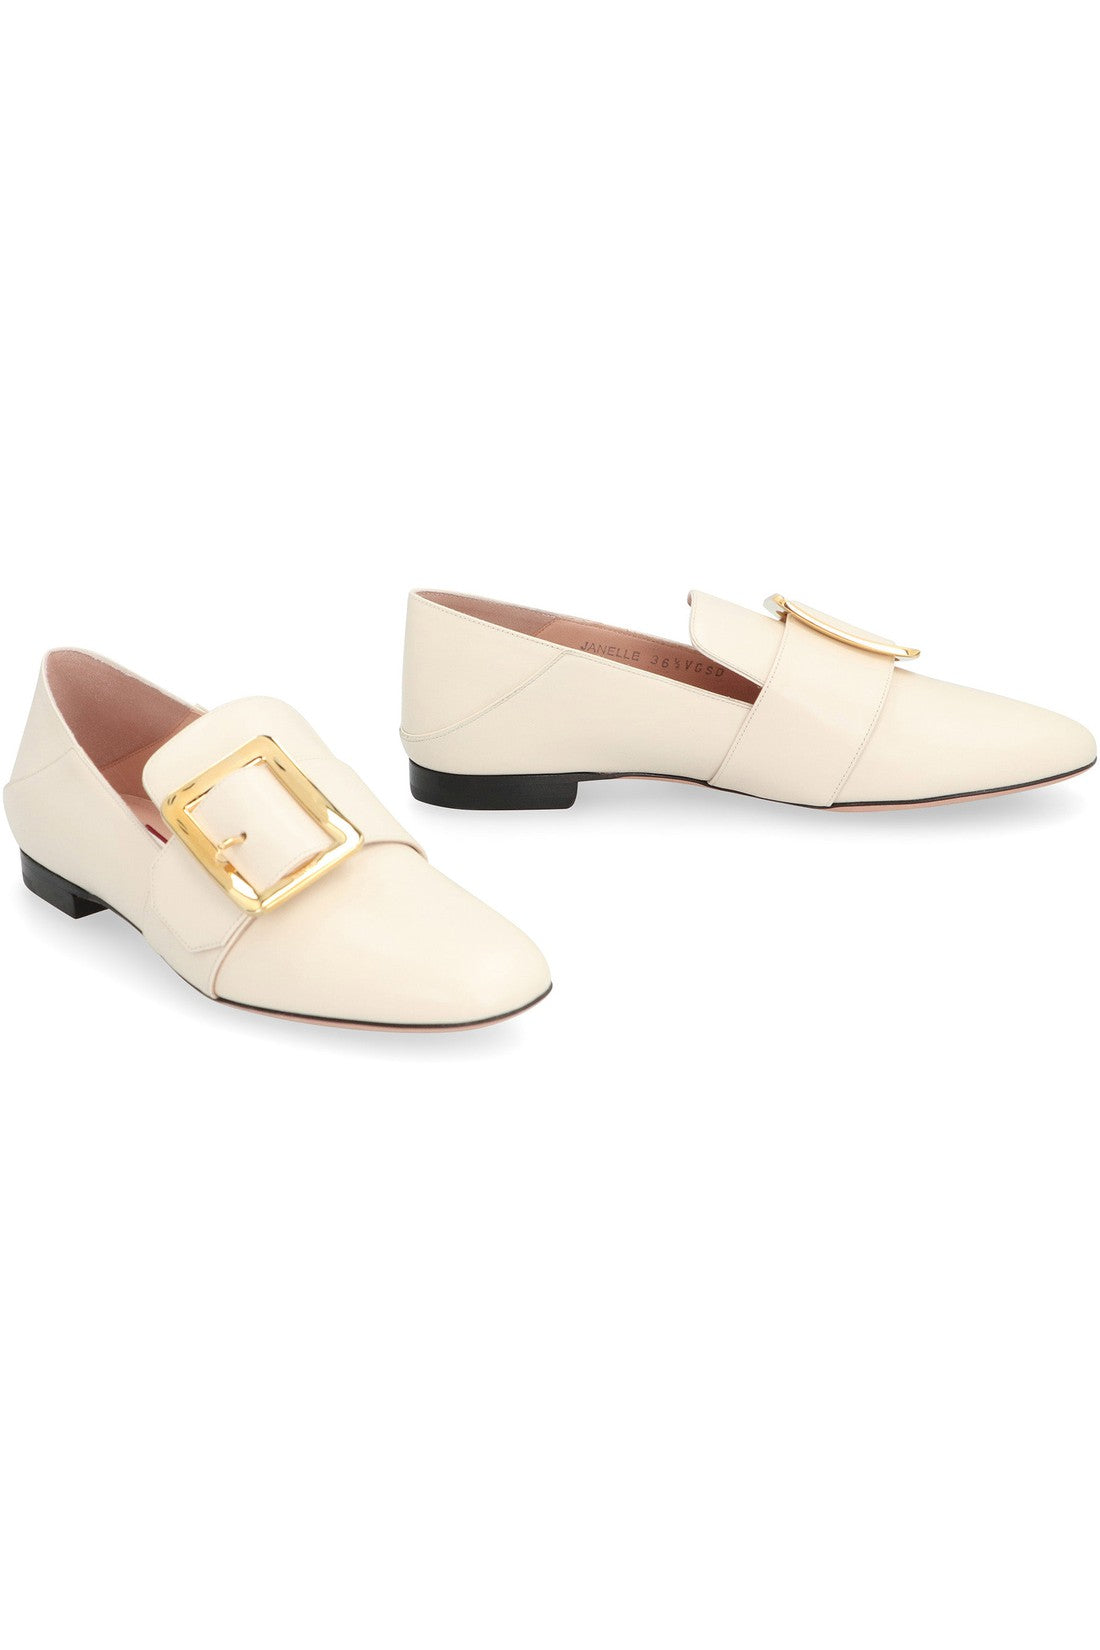 Bally-OUTLET-SALE-Janelle leather loafers-ARCHIVIST